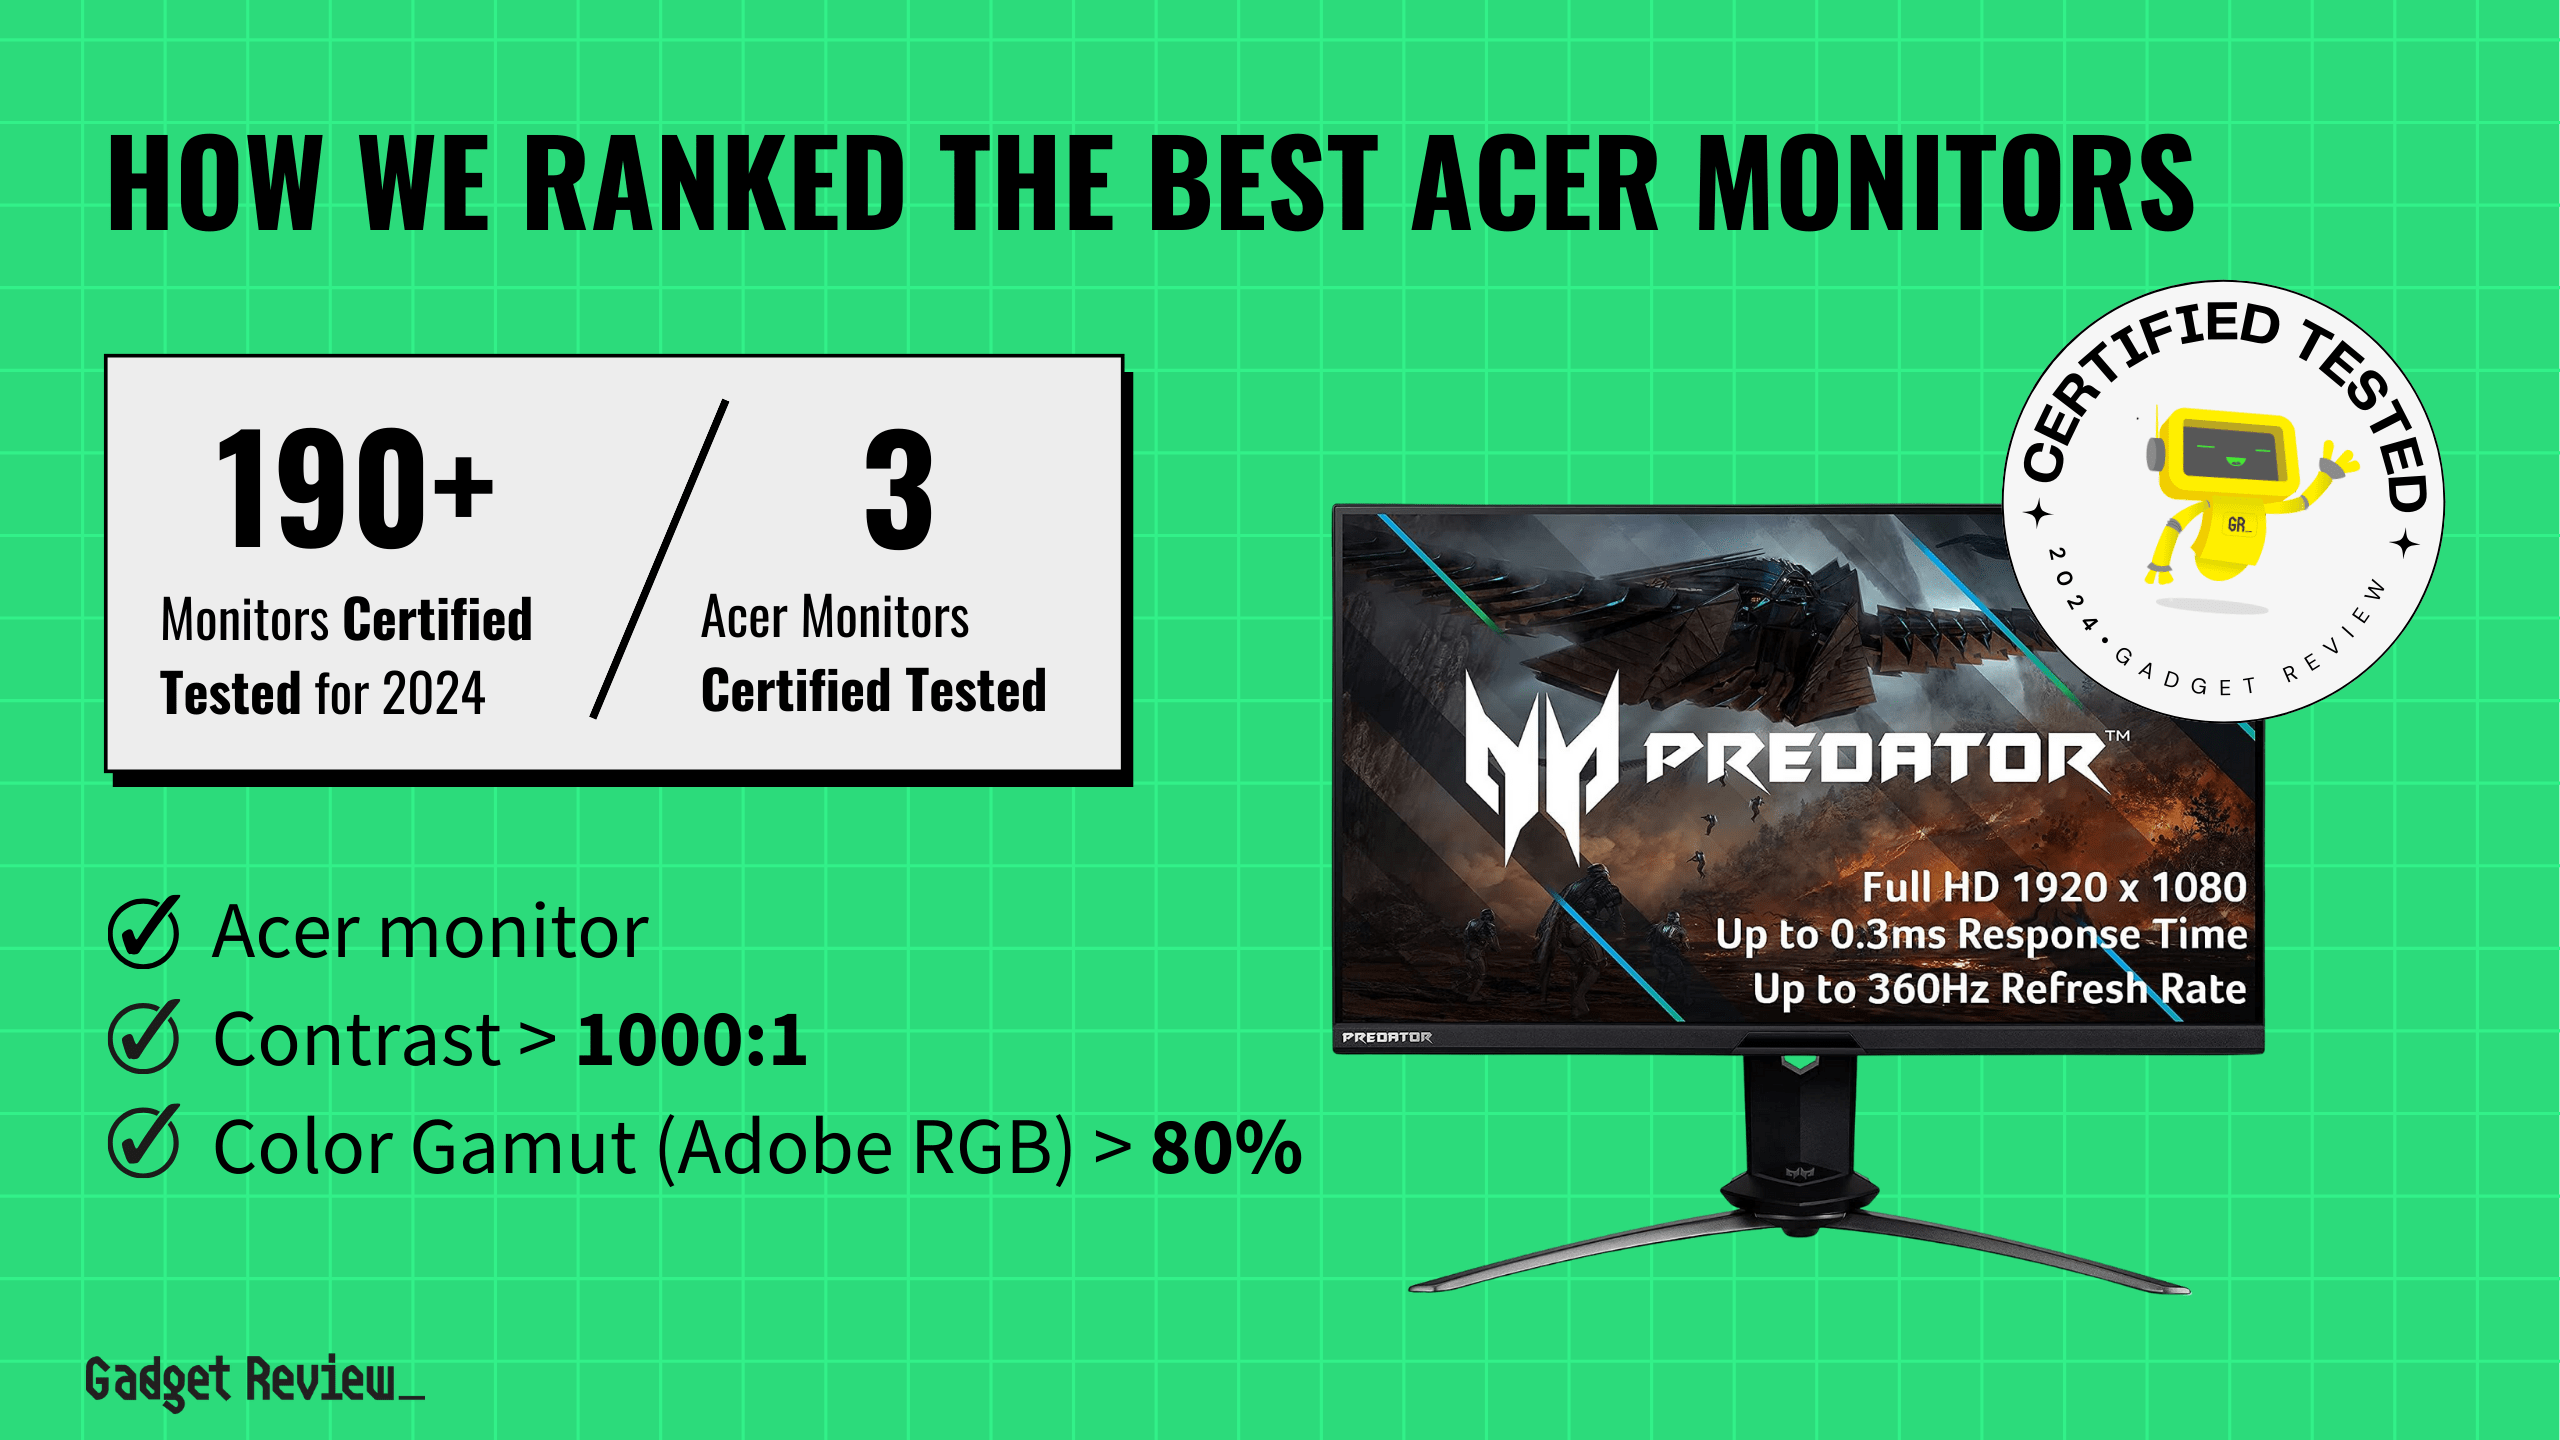 What Are The Top 3 Acer Monitors?